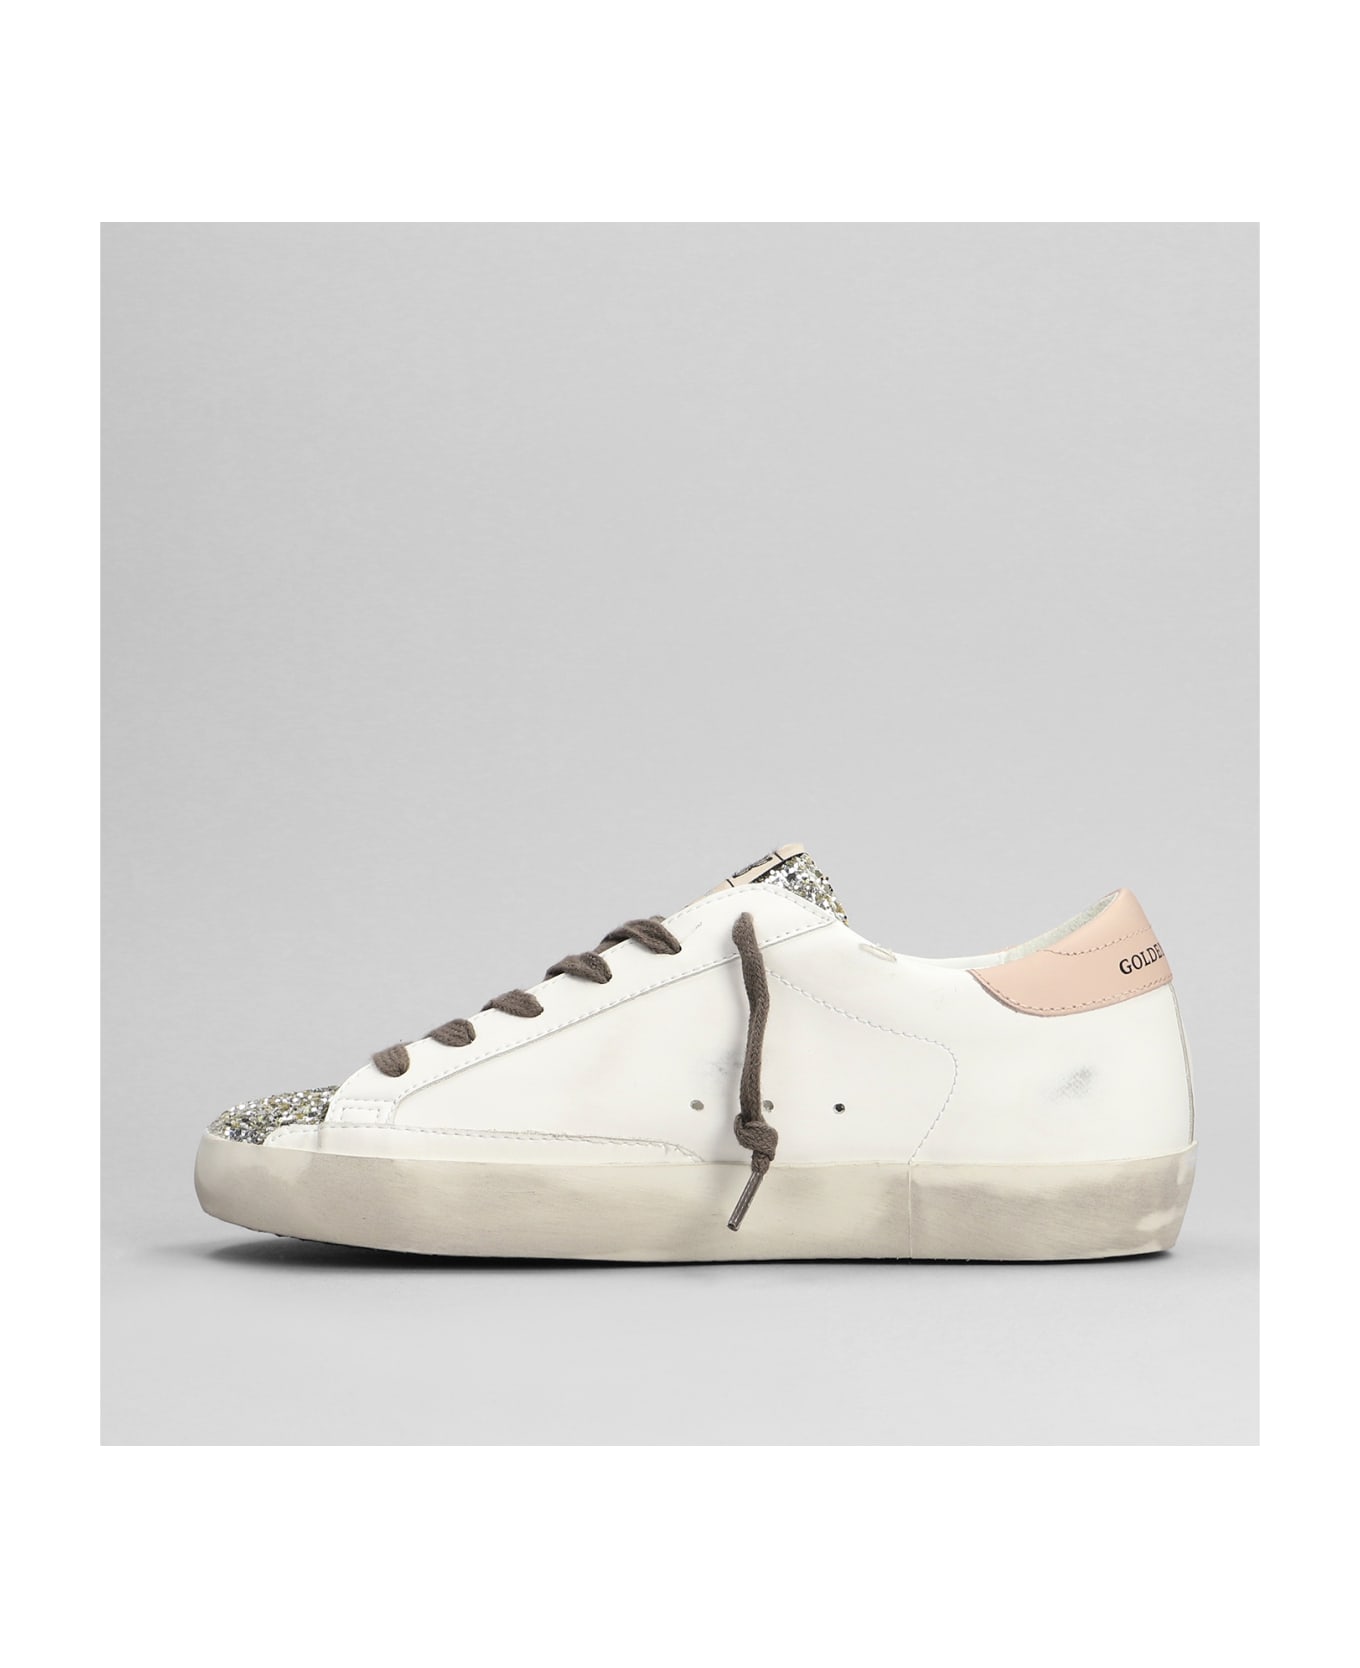 Golden Goose Superstar Sneakers In White Leather - white スニーカー